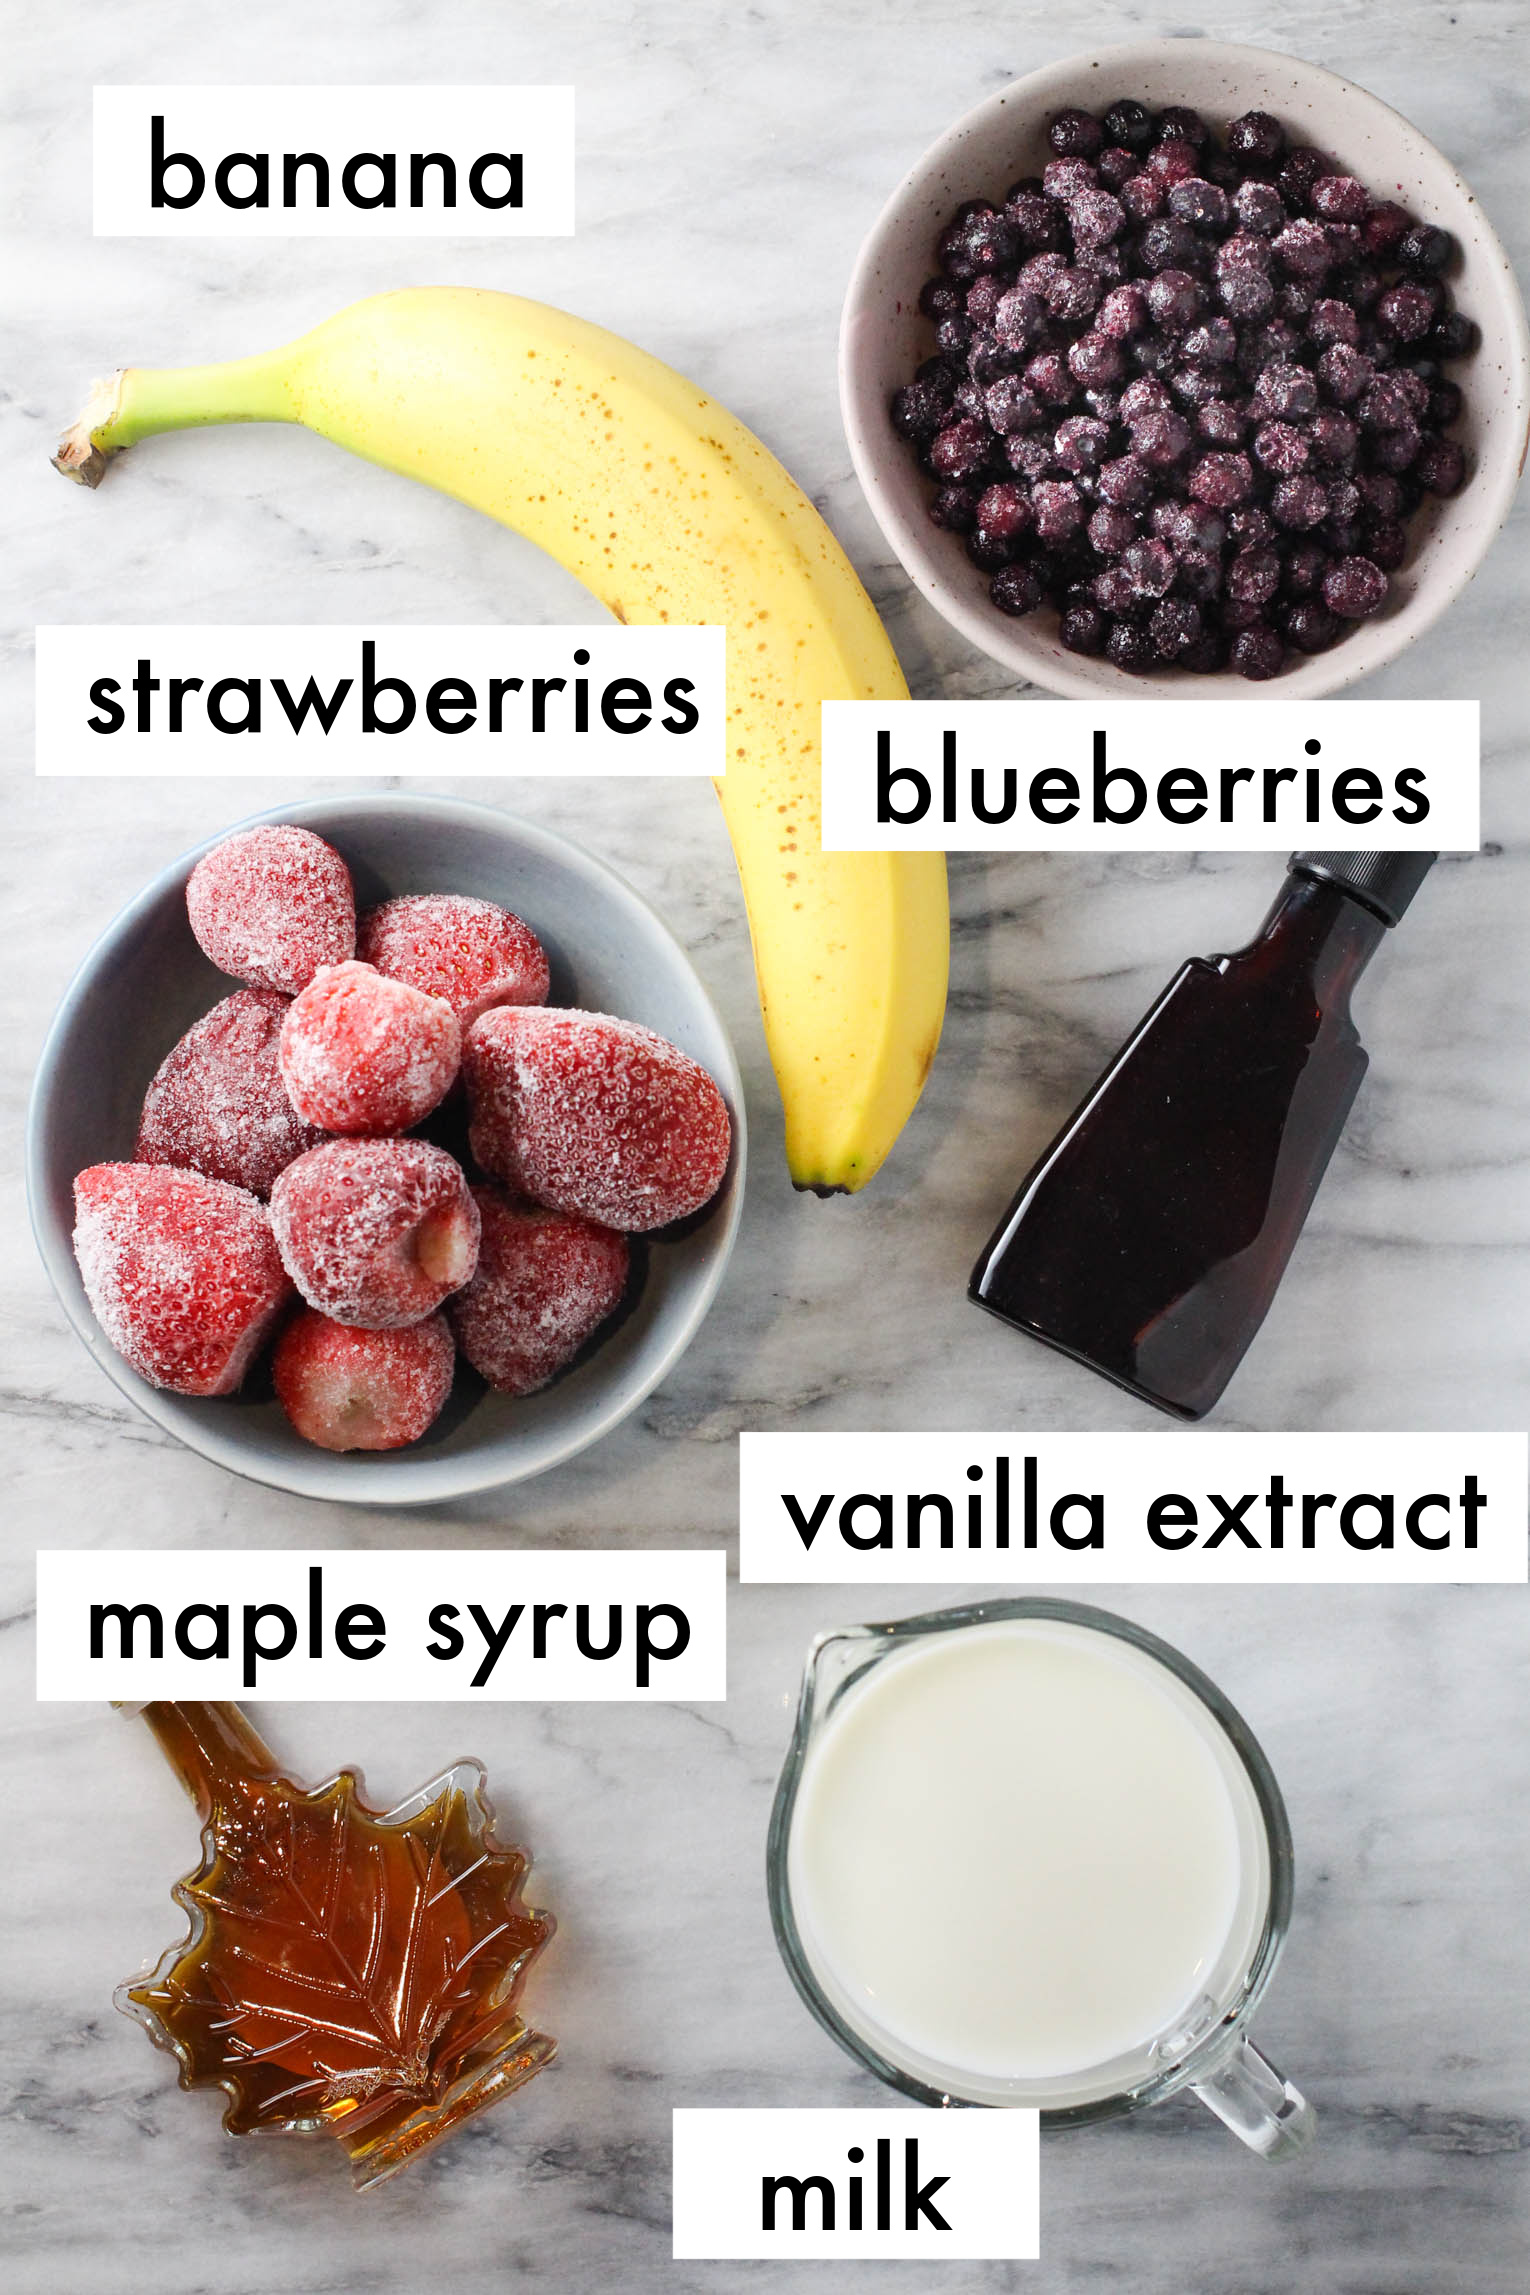 Smoothie ingredients labled as follows: banana, strawberries, blueberries, maple syrup, vanilla extract, milk.